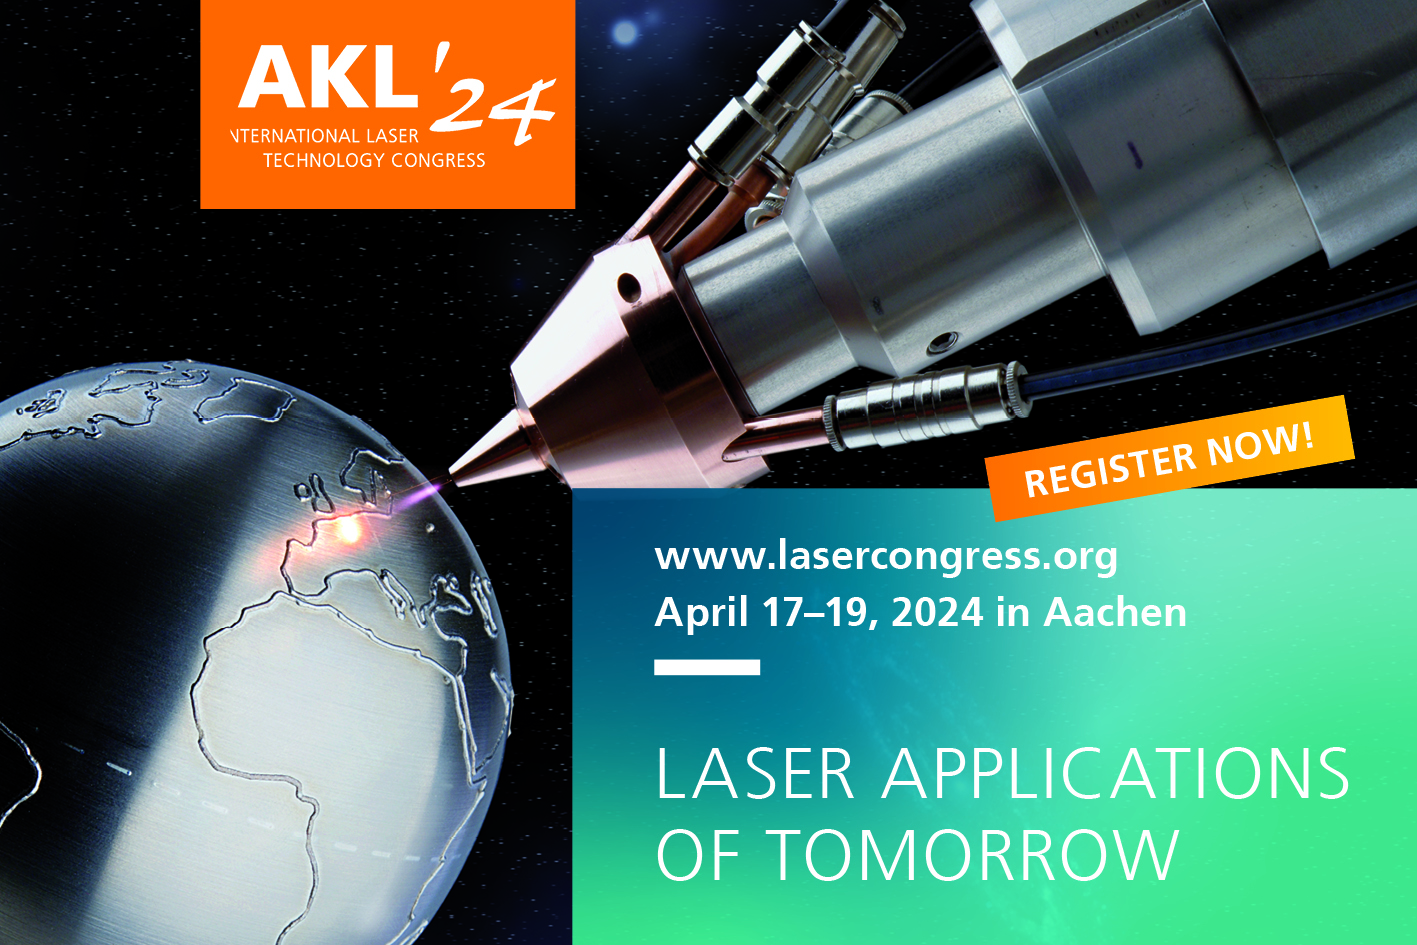 Registration for AKL'24 is now open at www.lasercongress.org.